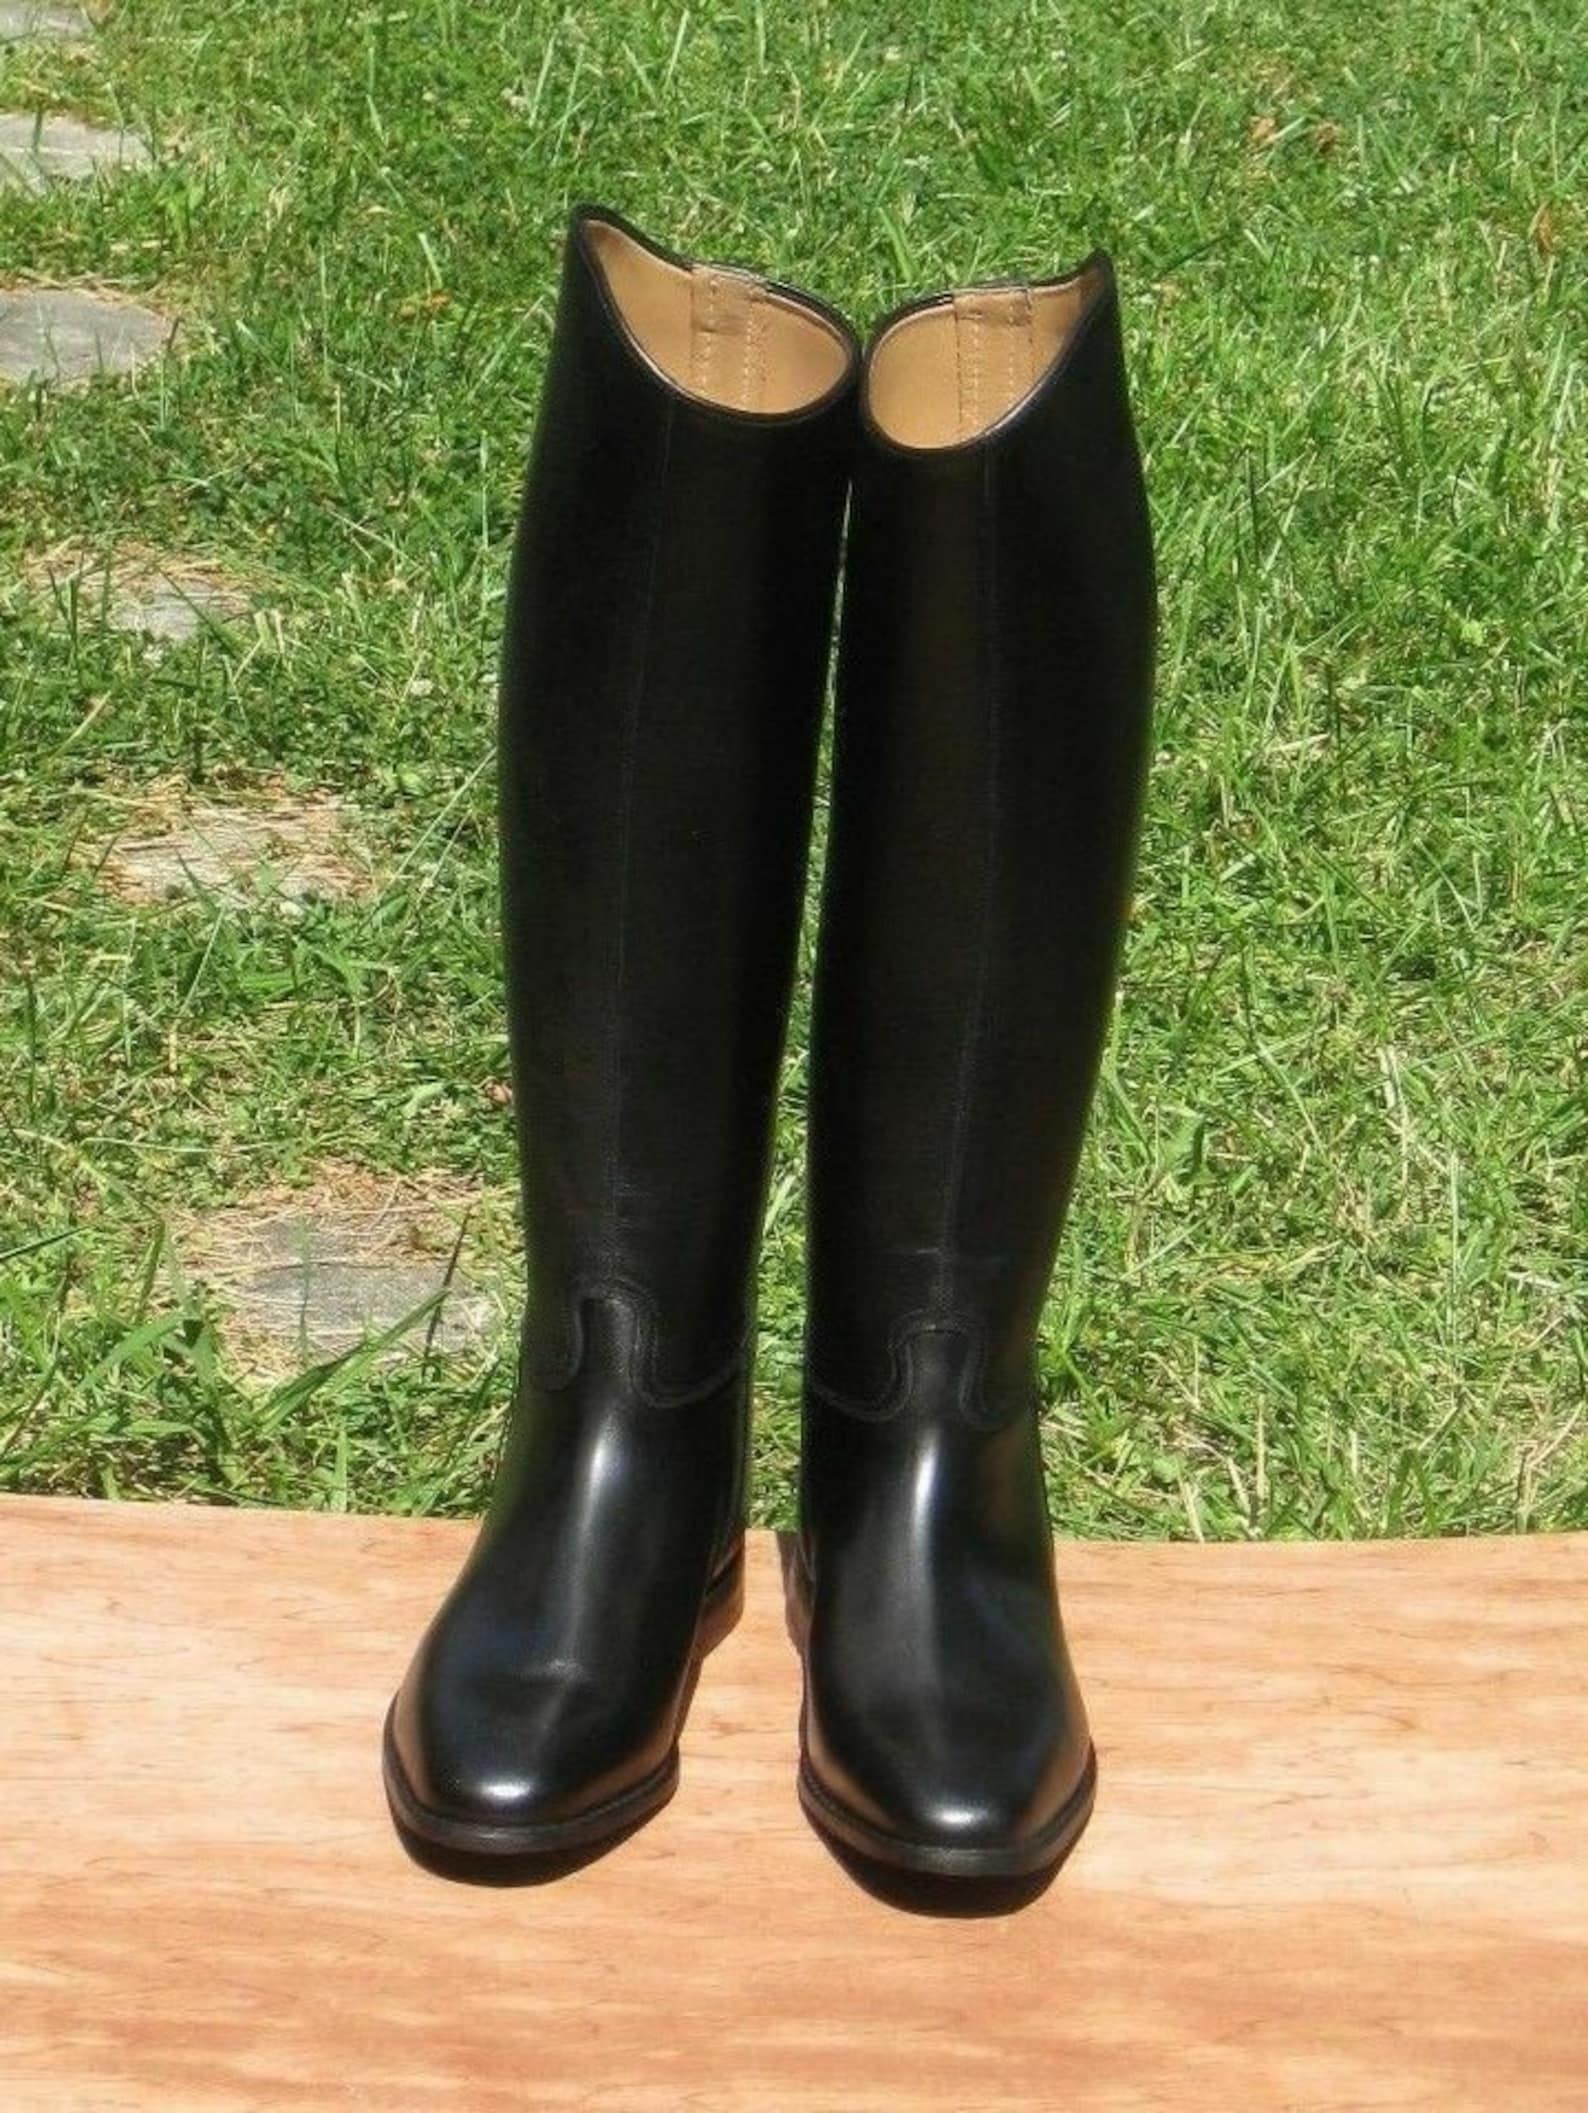 Leather Equestrian Riding Boots Leather Handmade English Dressage ...